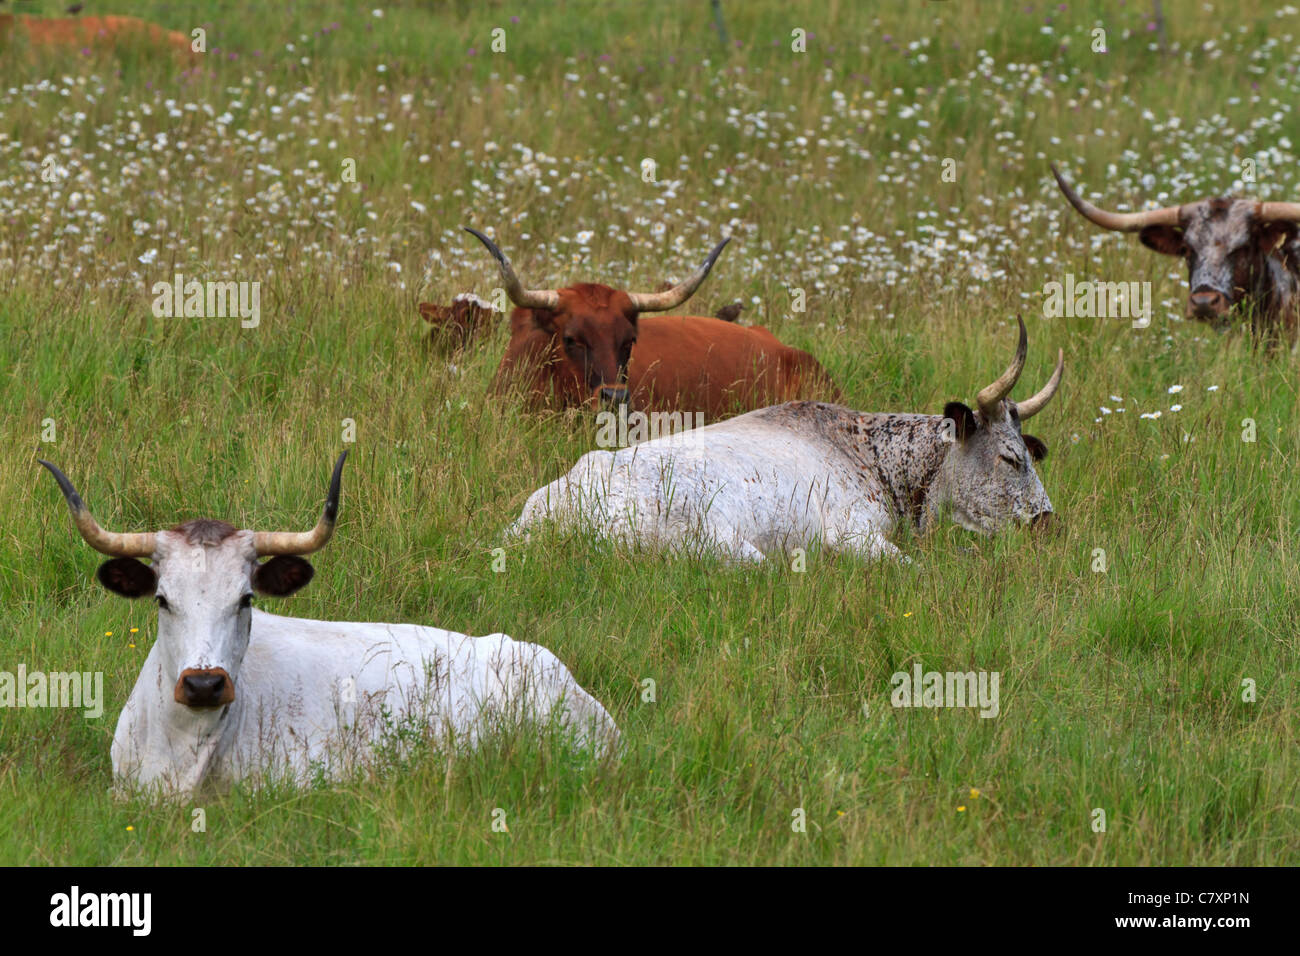 Longhorn cattle resting in a field of daisies. Stock Photo